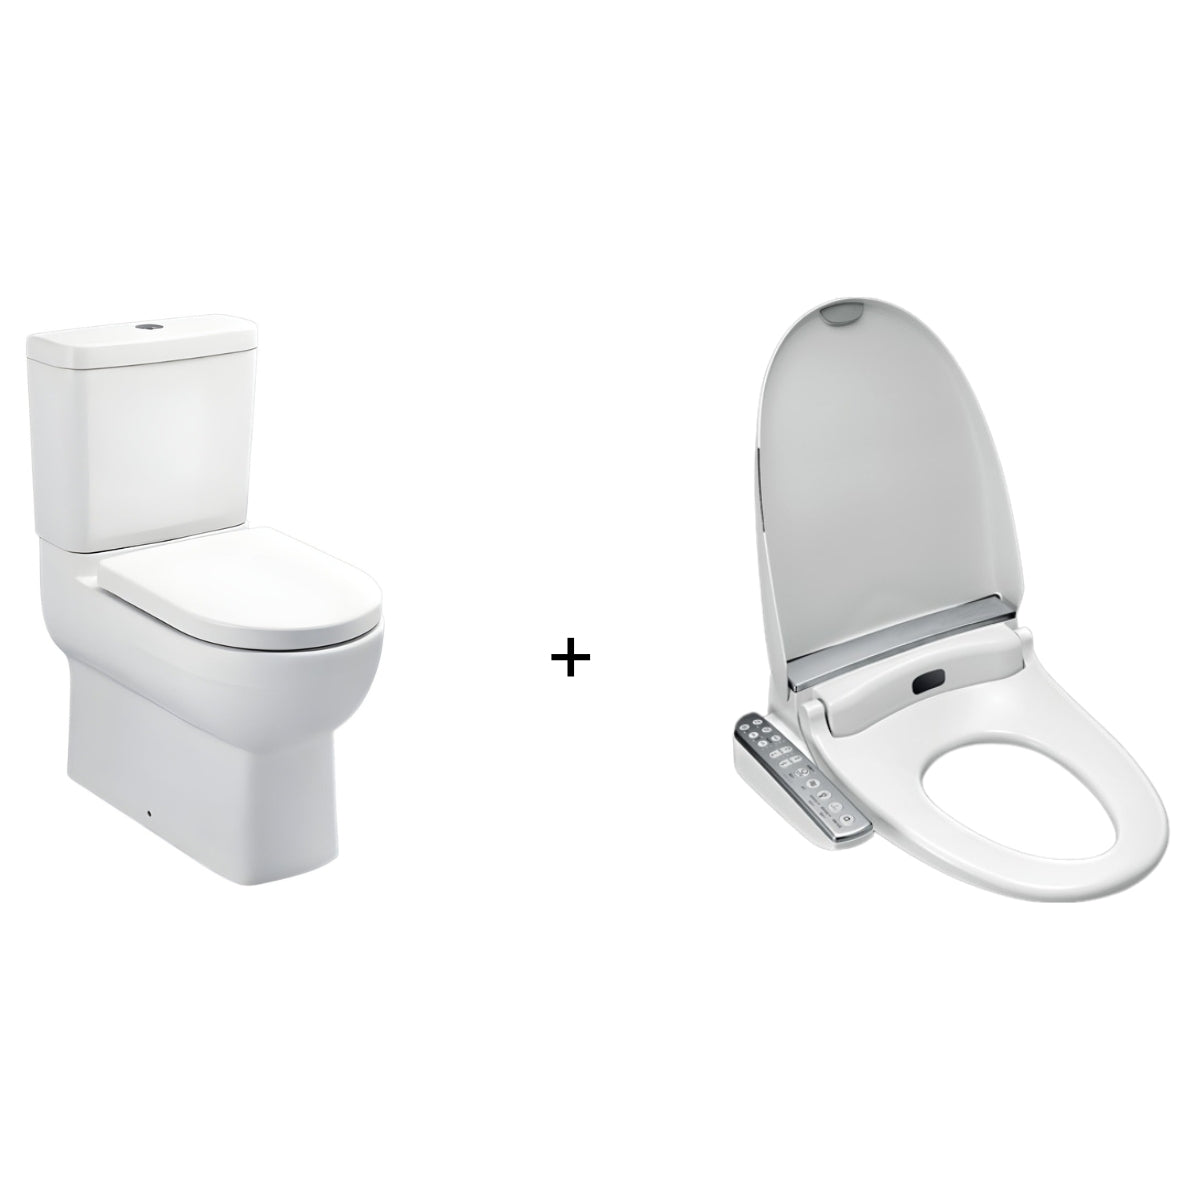 KOHLER ELECTRONIC BIDET SEAT W/ SIDE CONTROL AND REACH COMPACT BACK TO WALL PACKAGE ELONGATED GLOSS WHITE